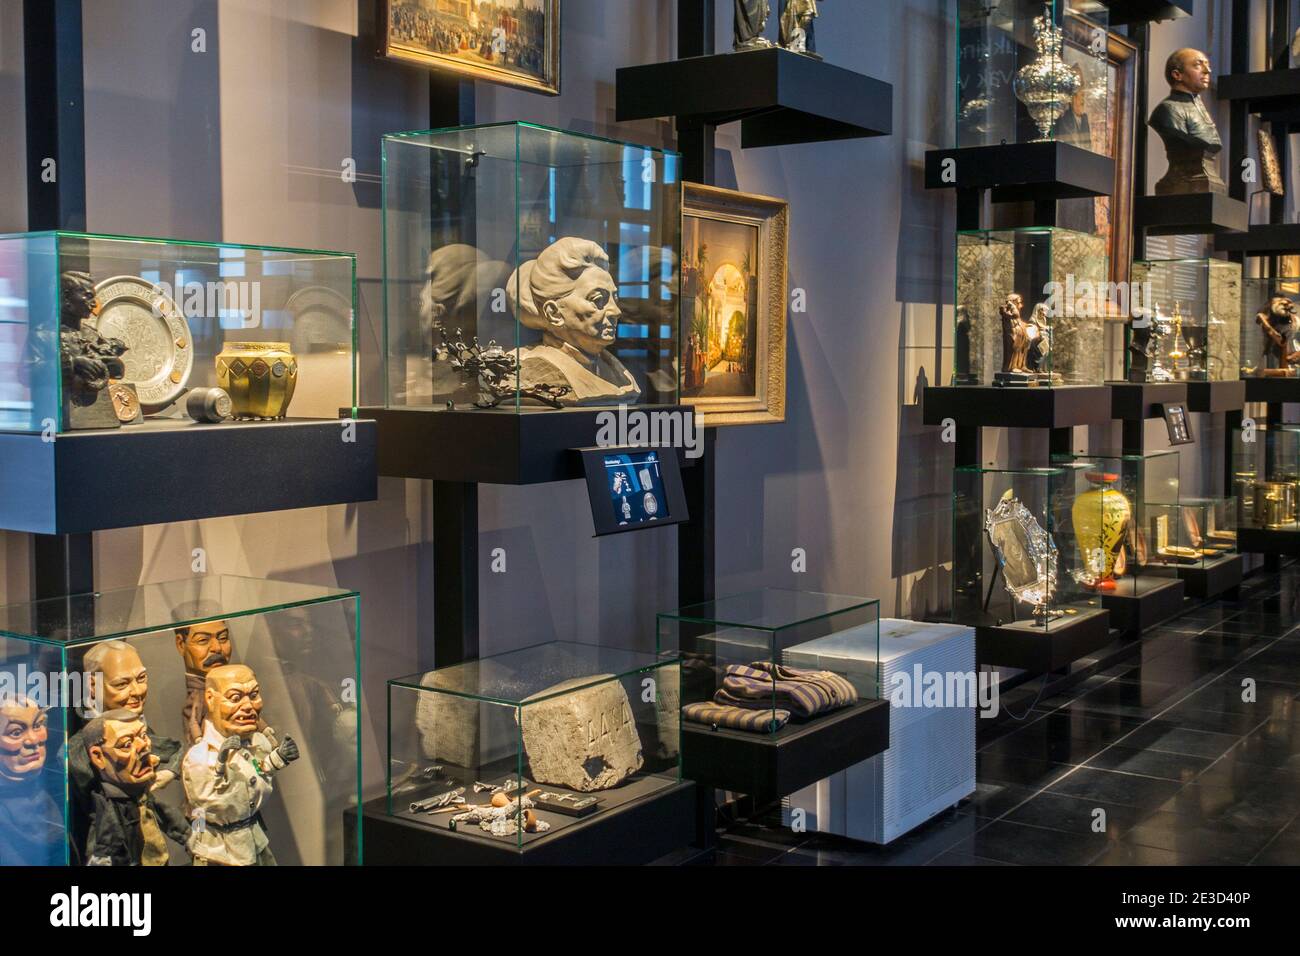 19th century collection in exhibition hall at STAM, Ghent City Museum / Stadsmuseum Gent, East Flanders, Belgium Stock Photo